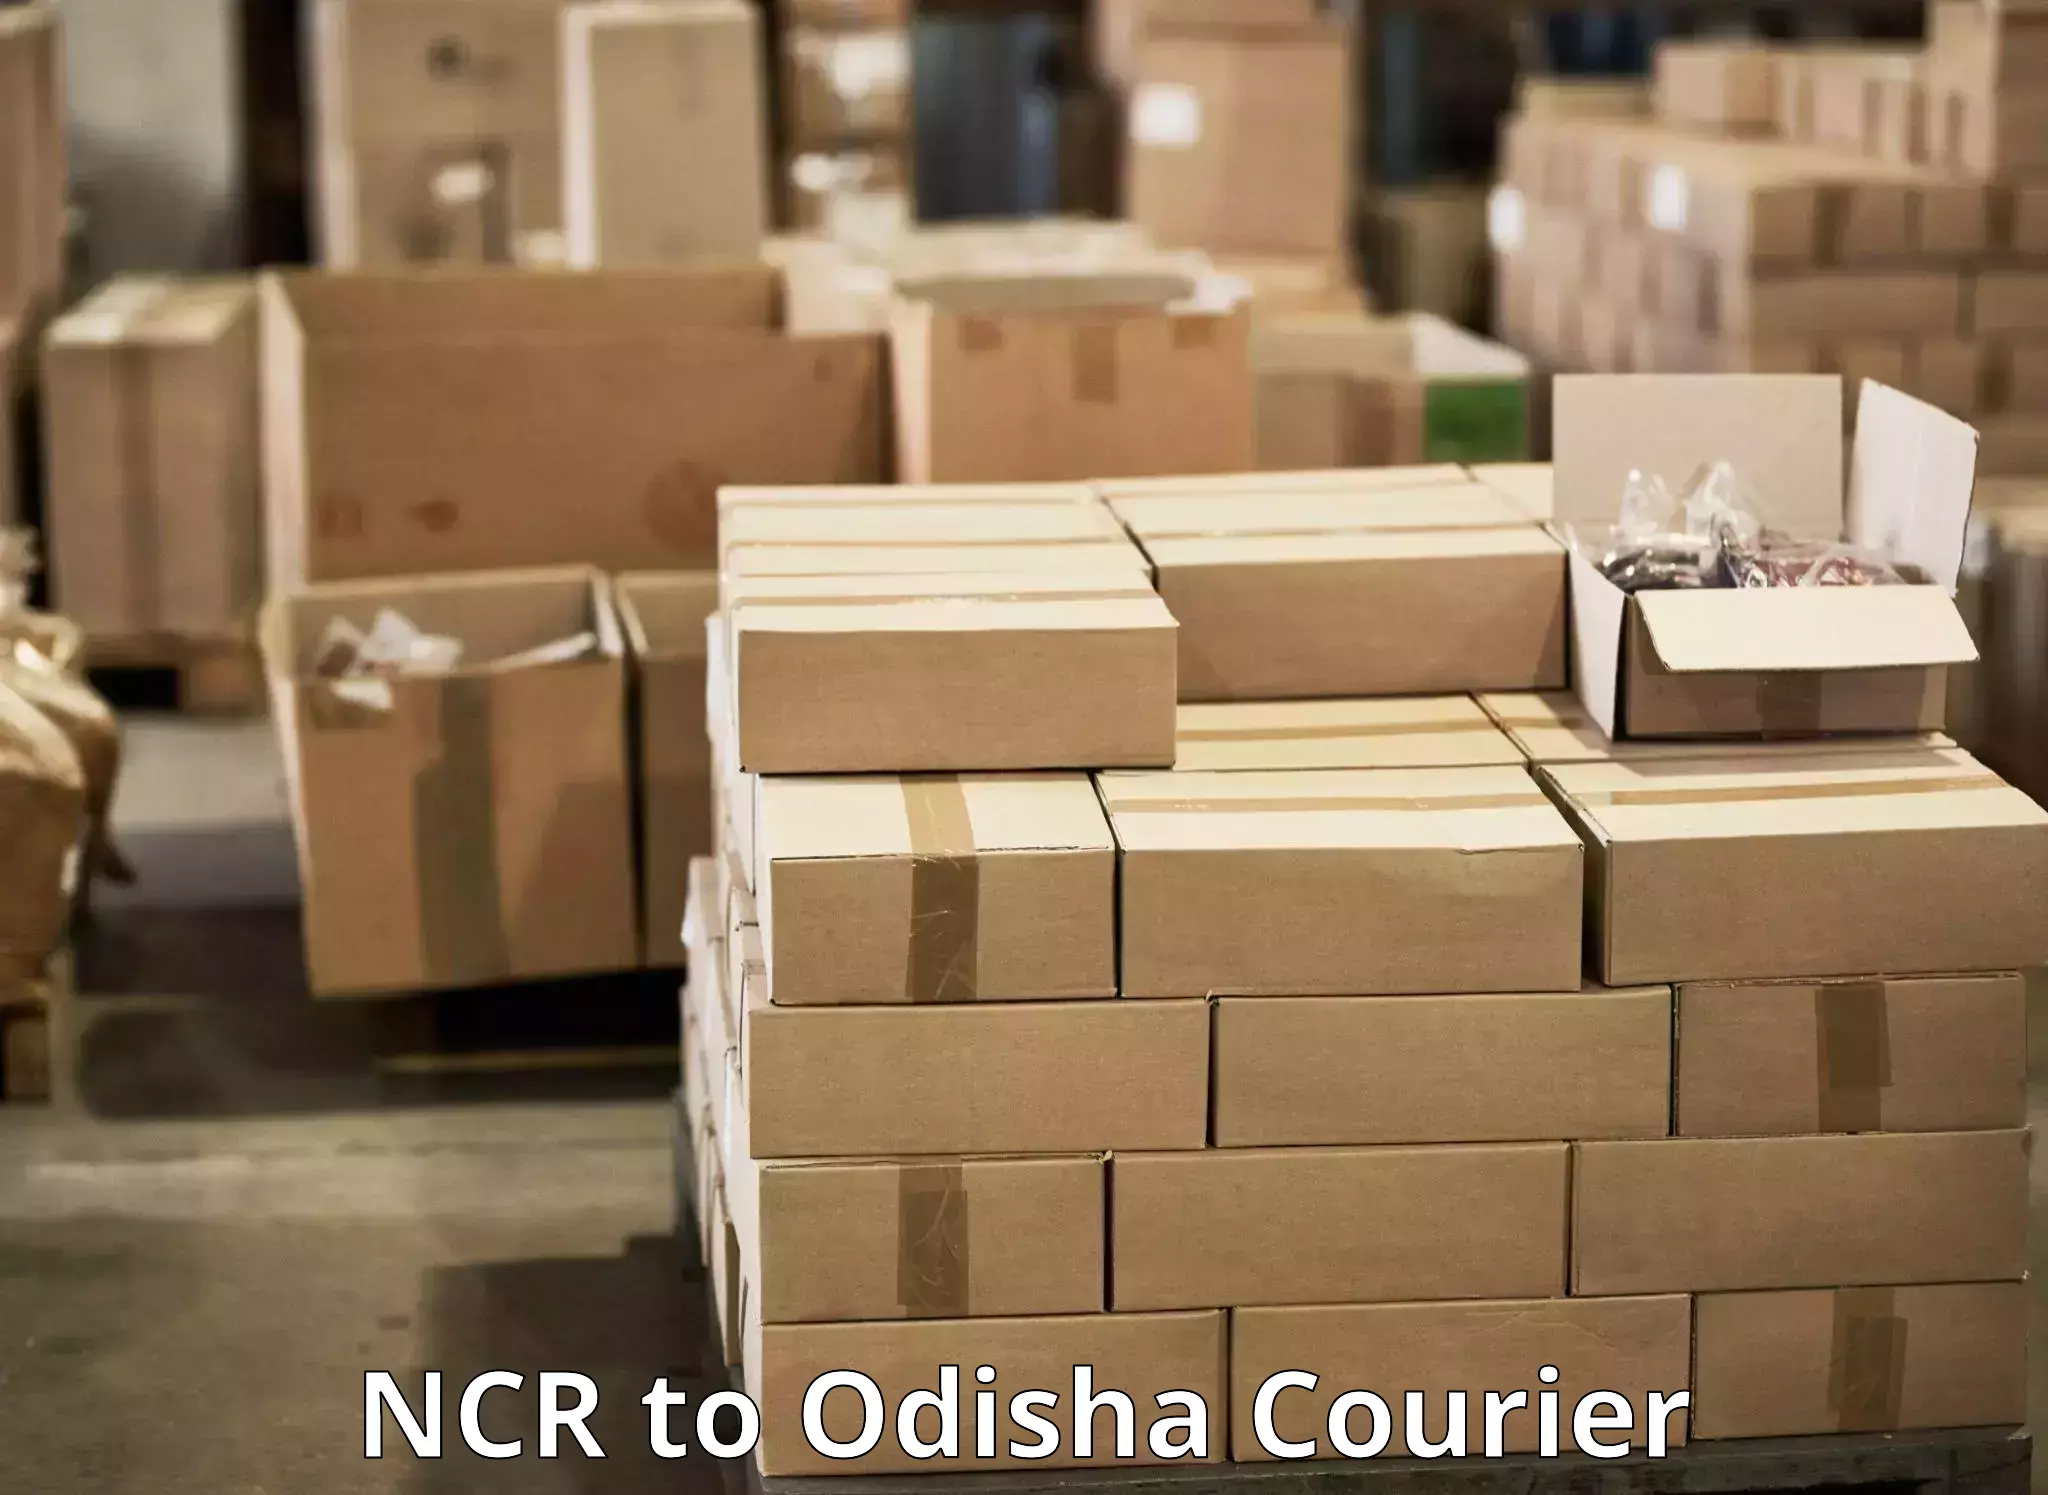 Express delivery network NCR to Jharsuguda